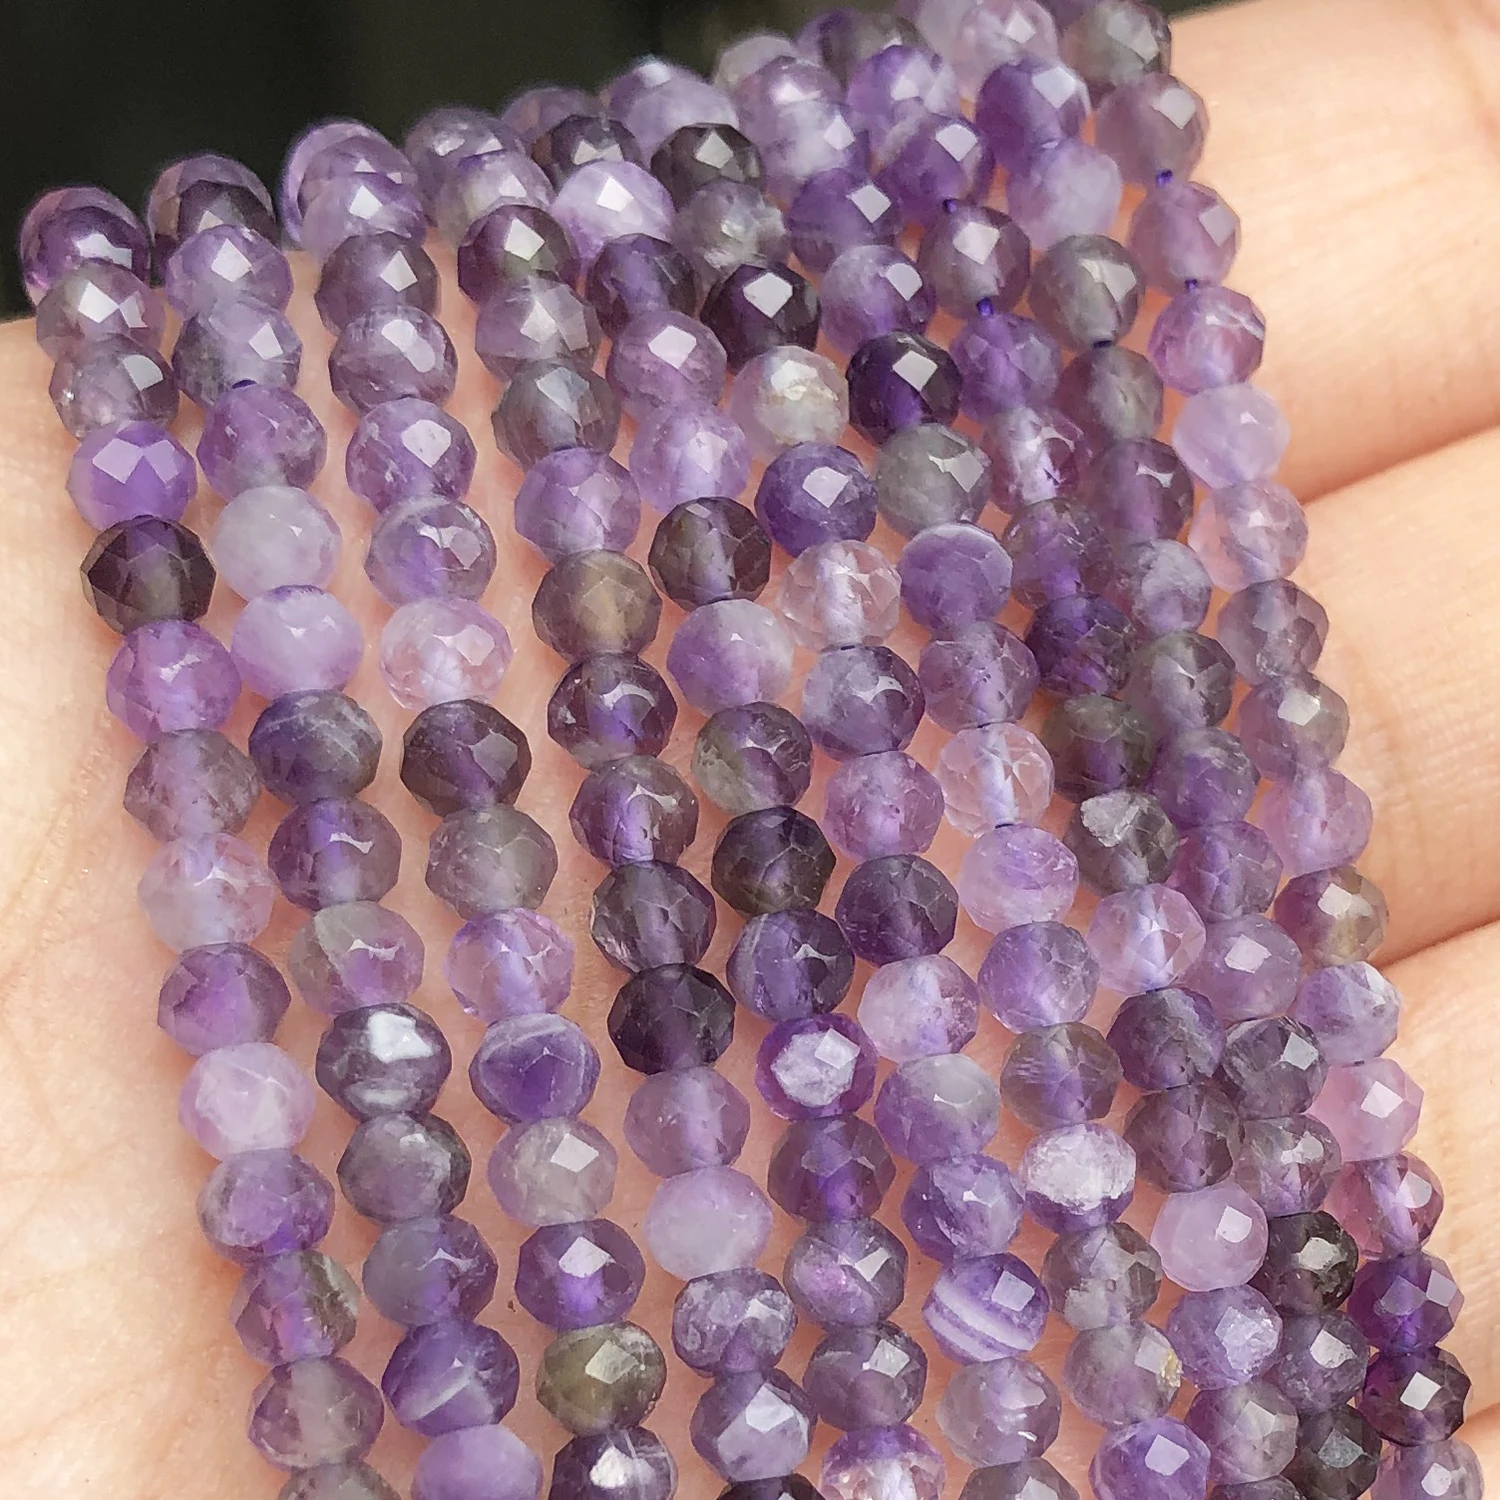 

4x3mm Natural Faceted Purple Amethysts Crystal Stone Beads Small Round Rondelle Beads for Jewelry Making DIY Bracelet Earrings